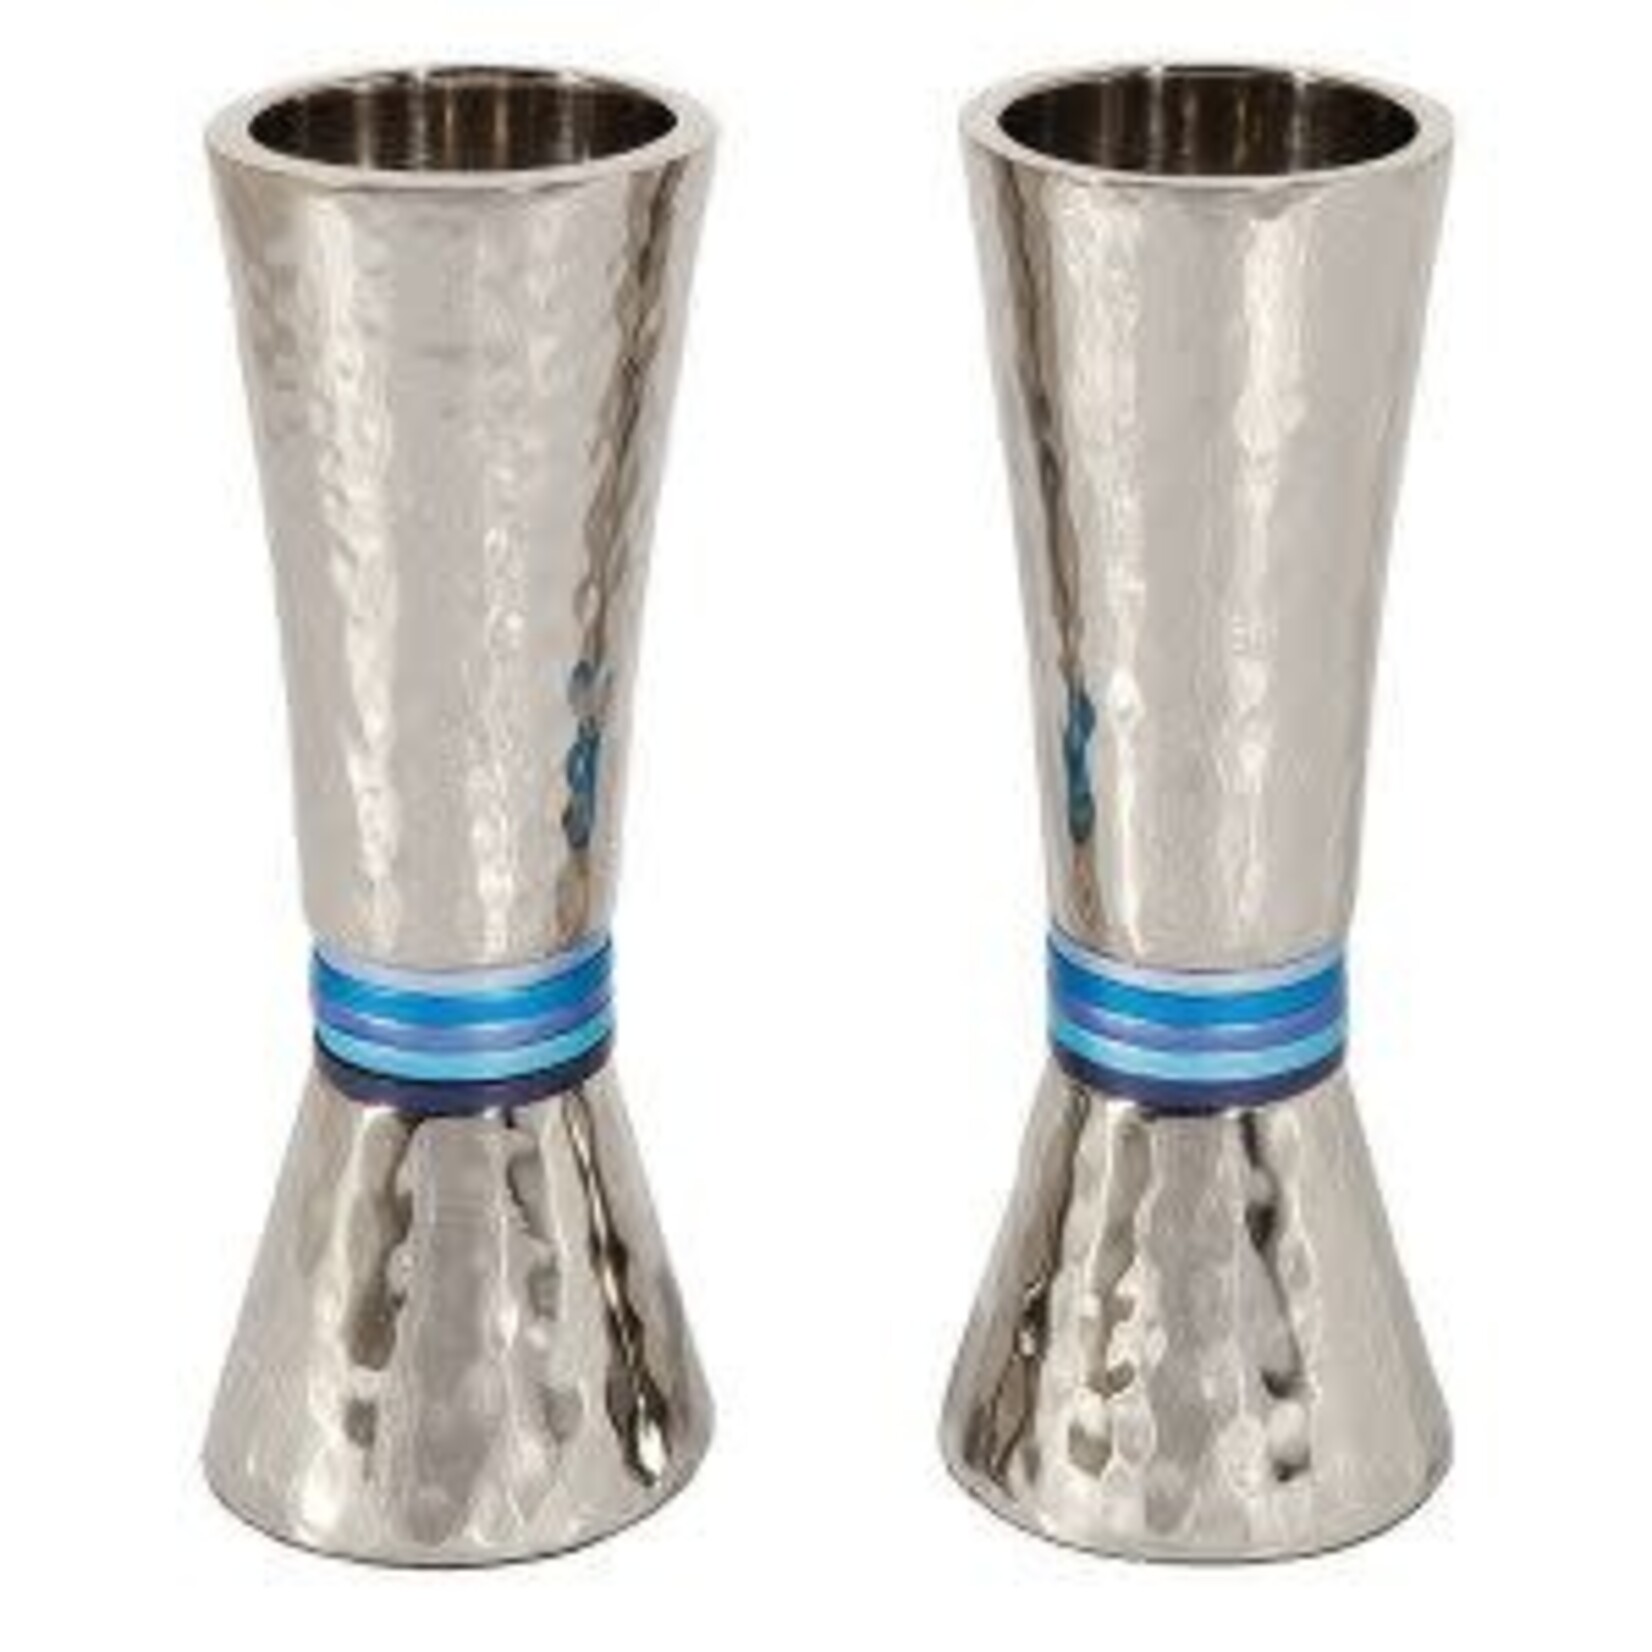 Conical Shaped Hammered Candlesticks - Blue Rings